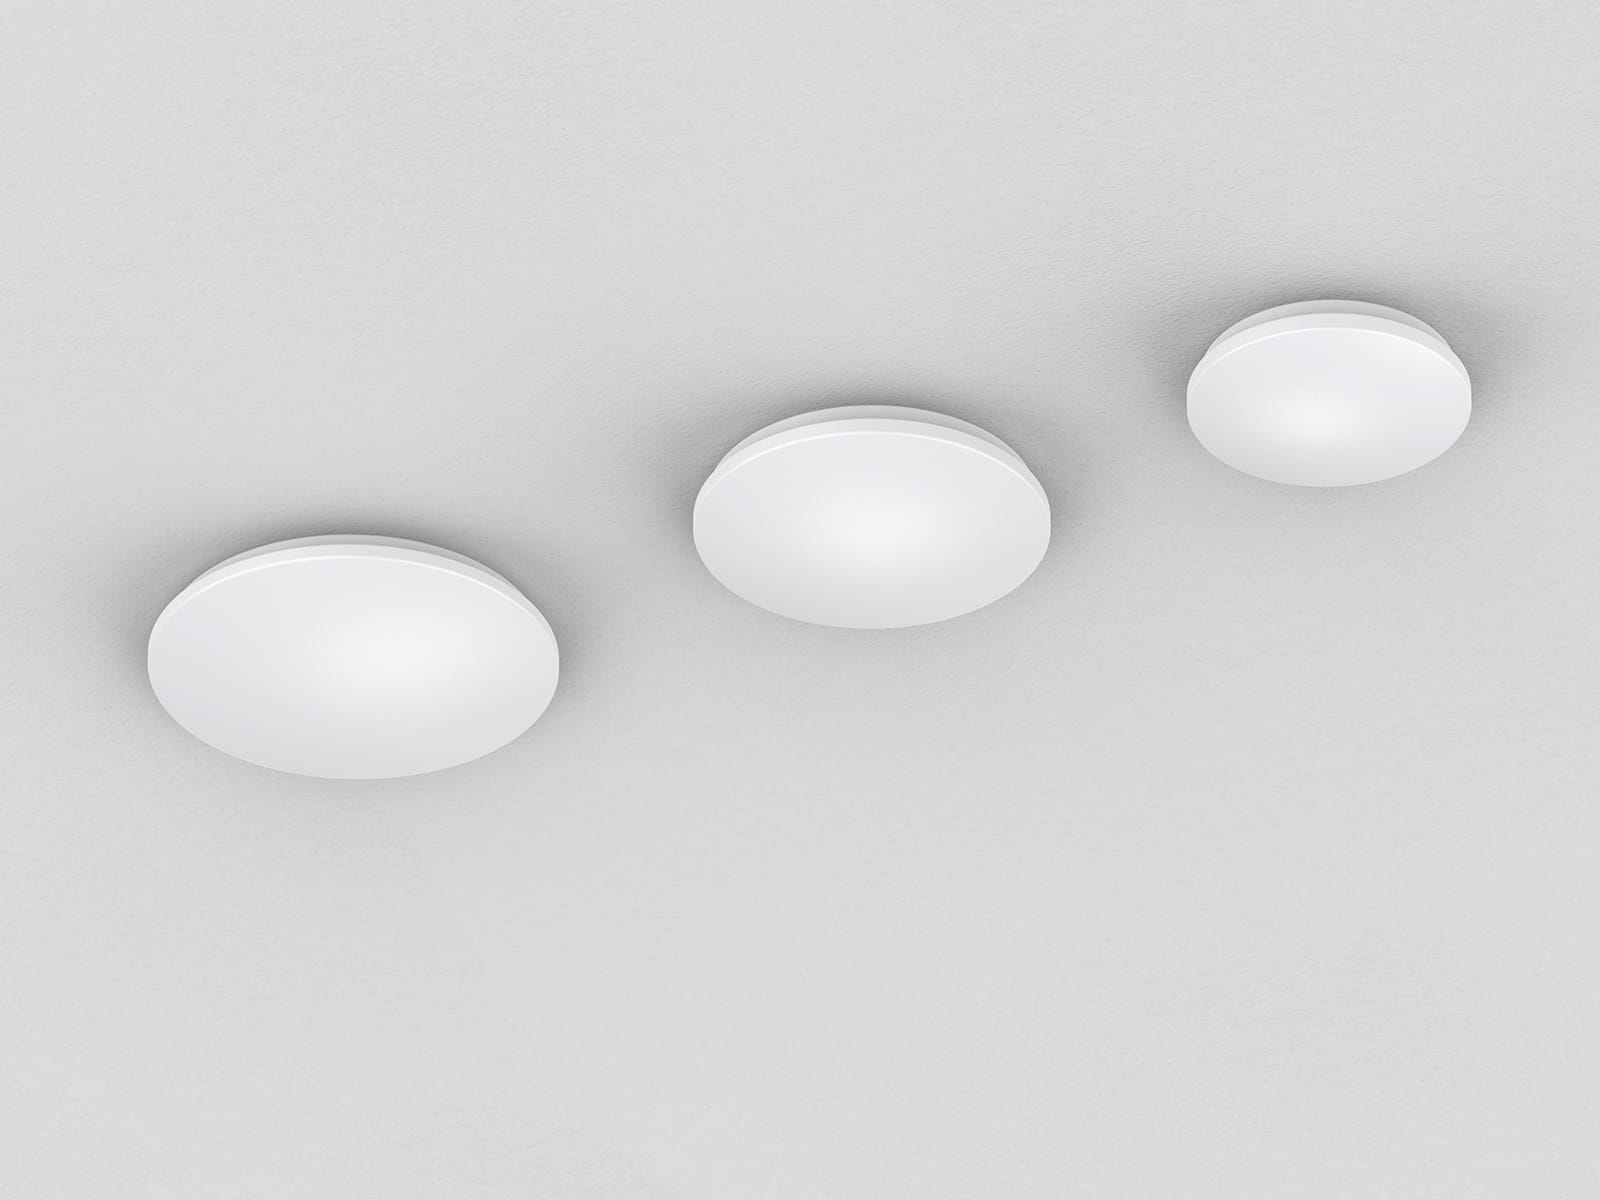 AL191 1 cost performance ceiling light with perfect line